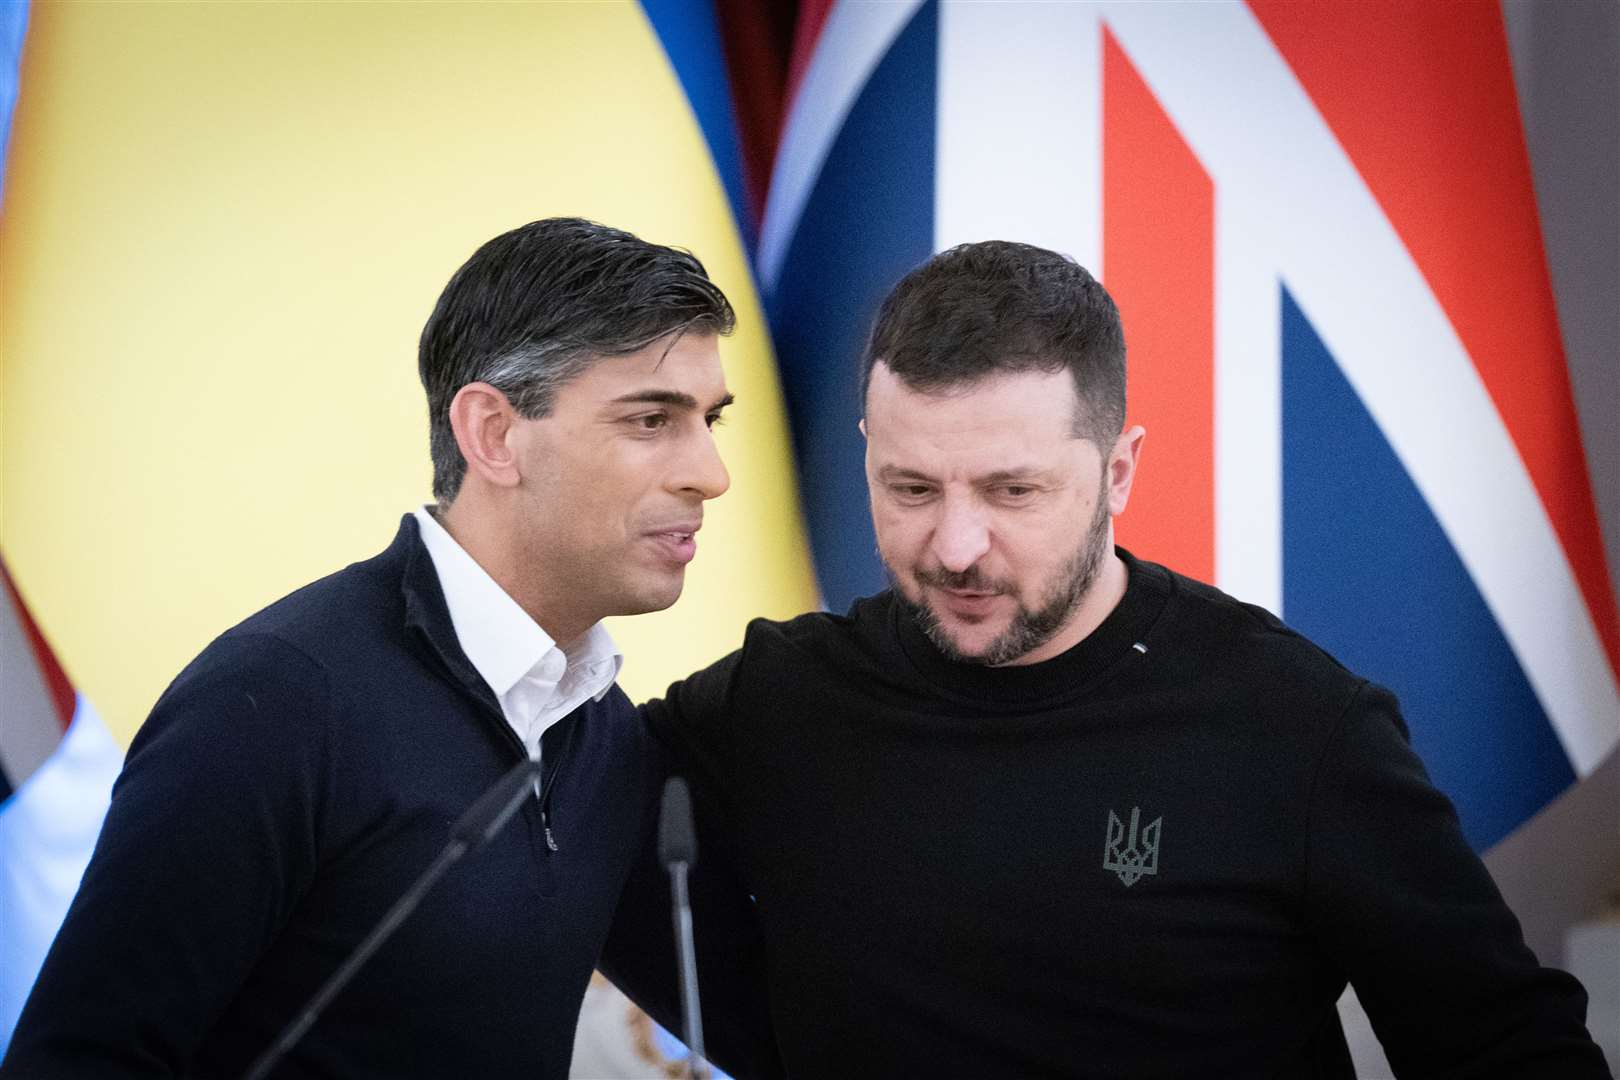 Prime Minister Rishi Sunak with President Volodymyr Zelensky at a signing ceremony during a visit to the Presidential Palace in Kyiv, Ukraine, to announce a major new package of a major new package of £2.5 billion in military aid to the country over the coming year (Stefan Rousseau/PA)